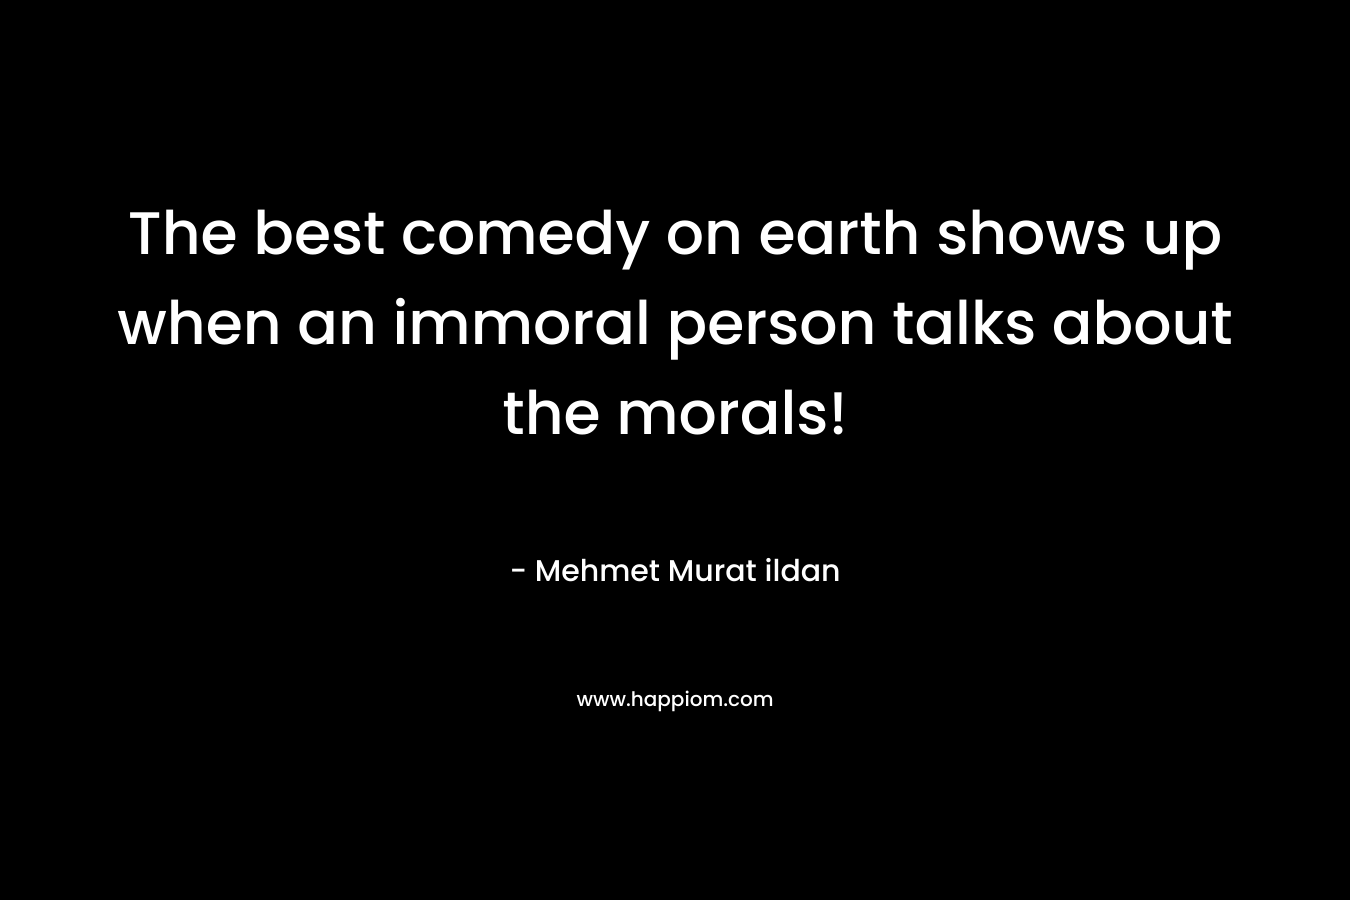 The best comedy on earth shows up when an immoral person talks about the morals! – Mehmet Murat ildan